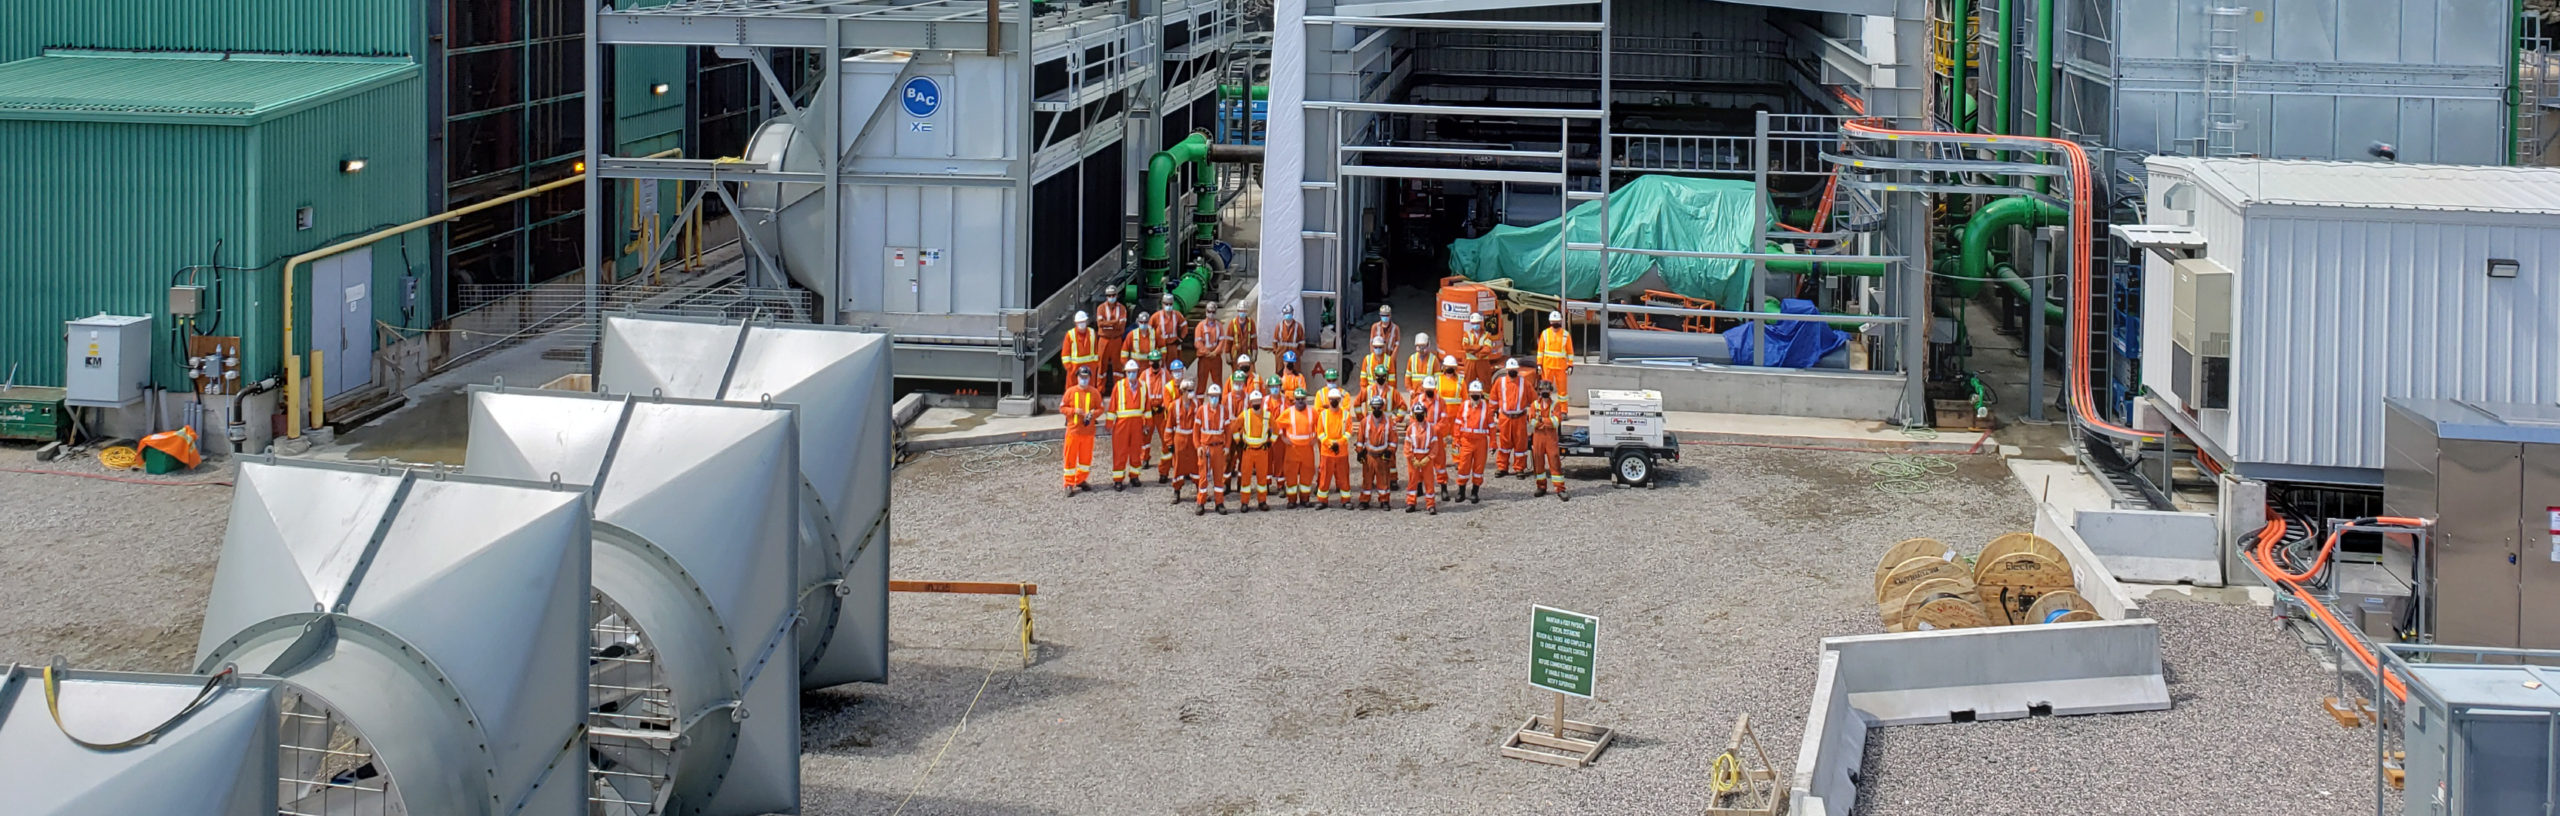 Patrick mechanical group picture at coleman mine site for refrigeration and air cooling system